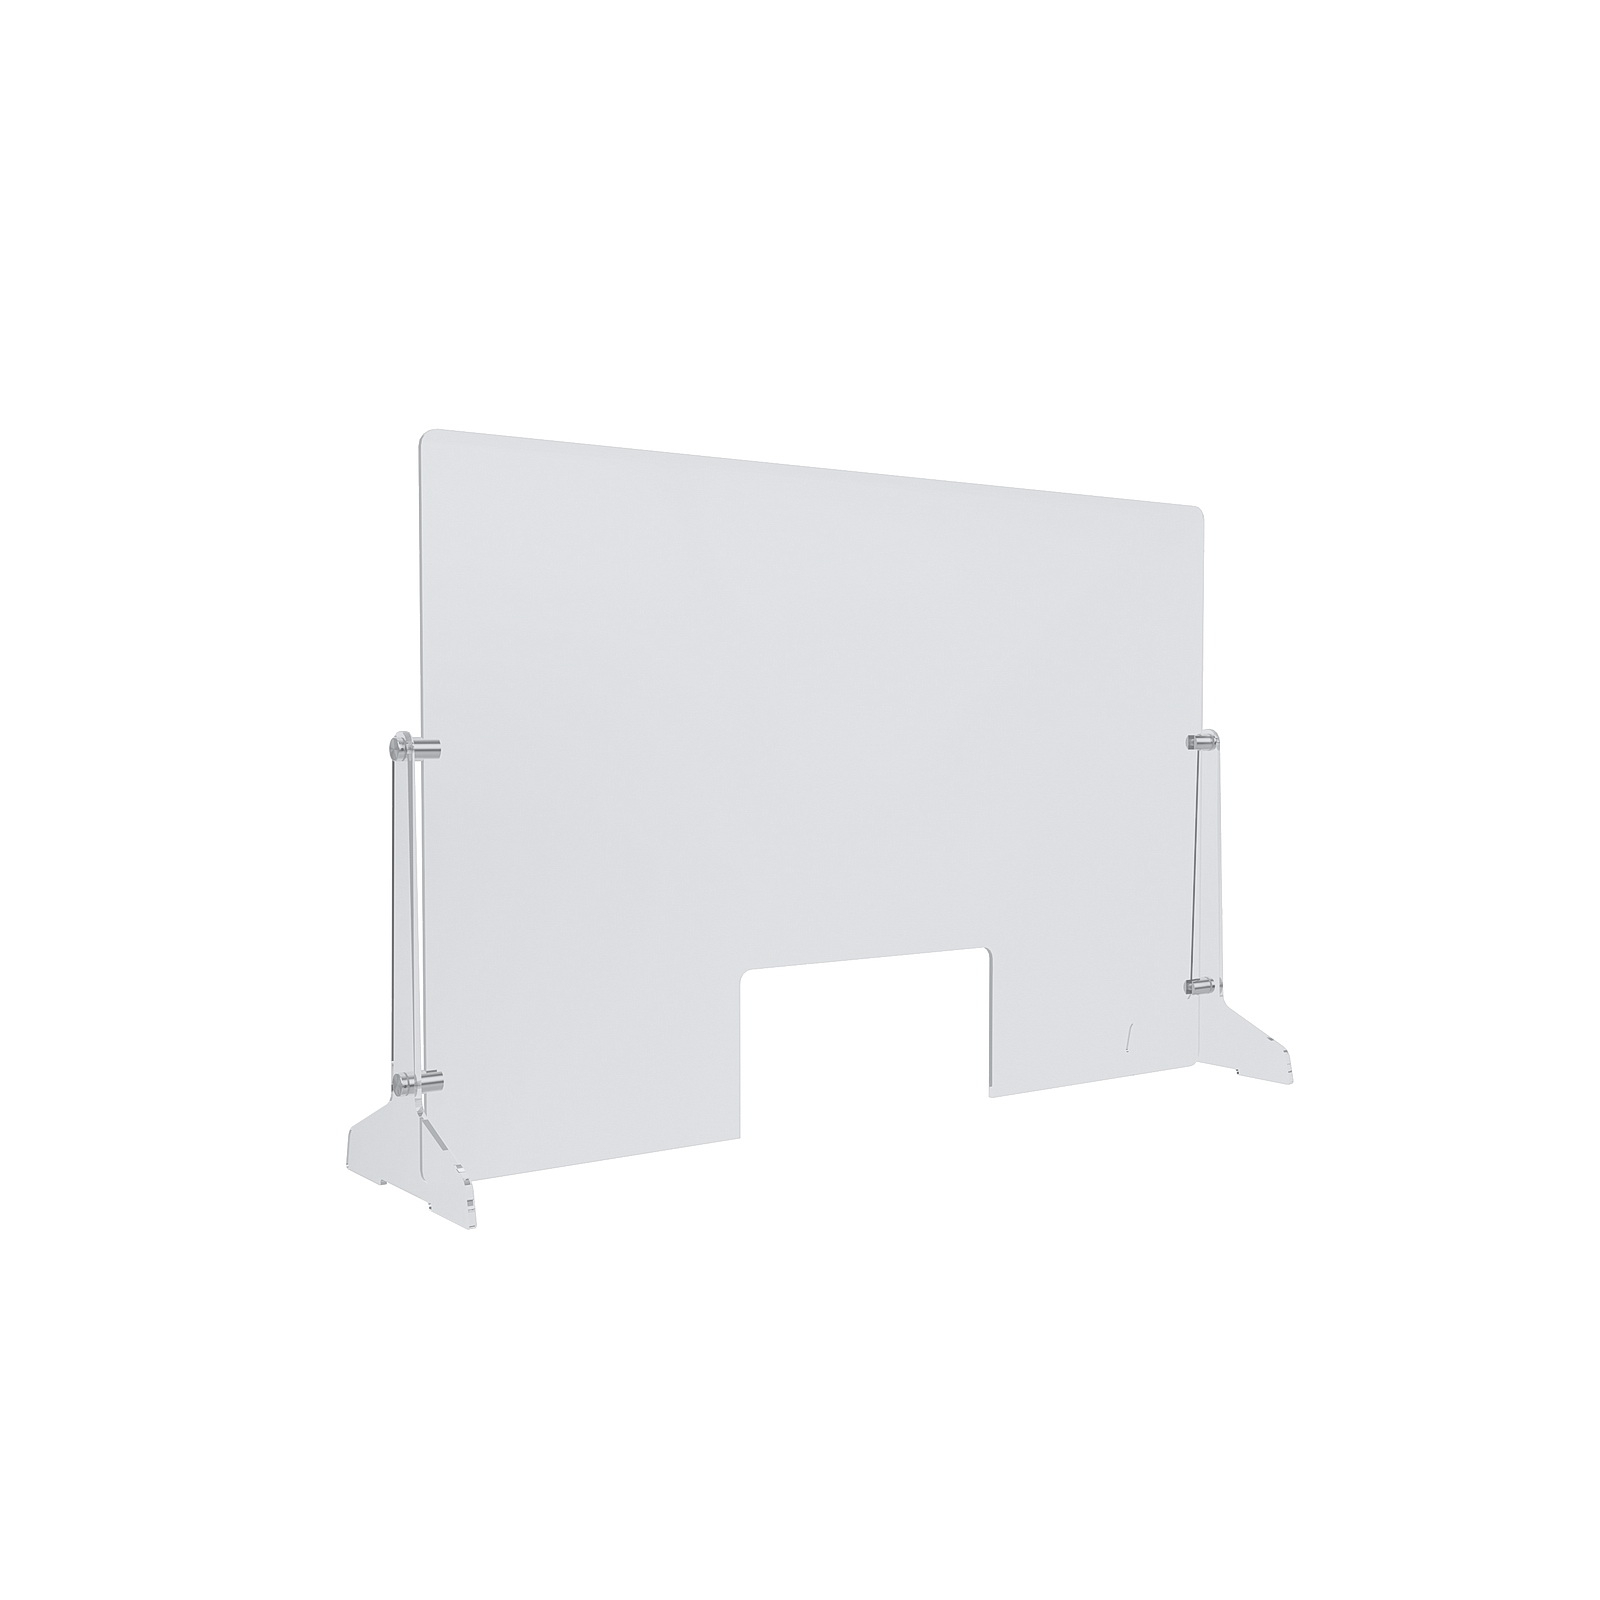 Clear Acrylic Sneeze Guard 30'' Wide x 20'' Tall (10'' x 5'' Cut Out), with (2) 7'' Wide x 12-5/16'' Deep Feet on the Side, and (4) Aluminum Clear Anodized Forks / Standoffs..